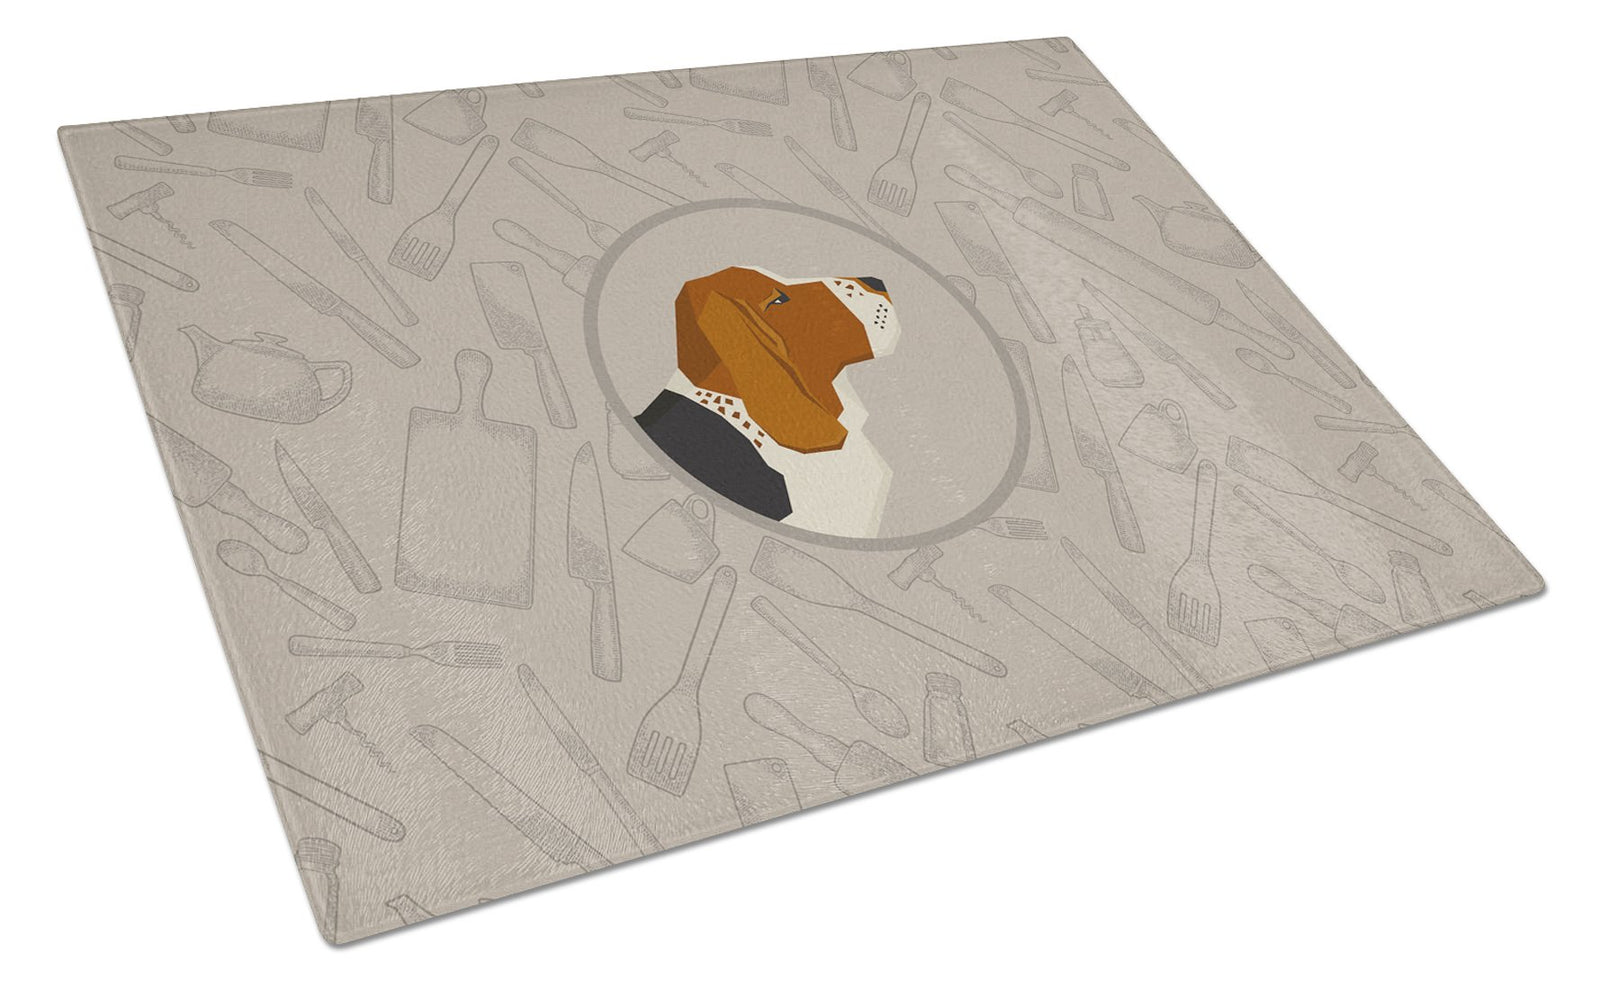 Basset Hound In the Kitchen Glass Cutting Board Large CK2165LCB by Caroline's Treasures